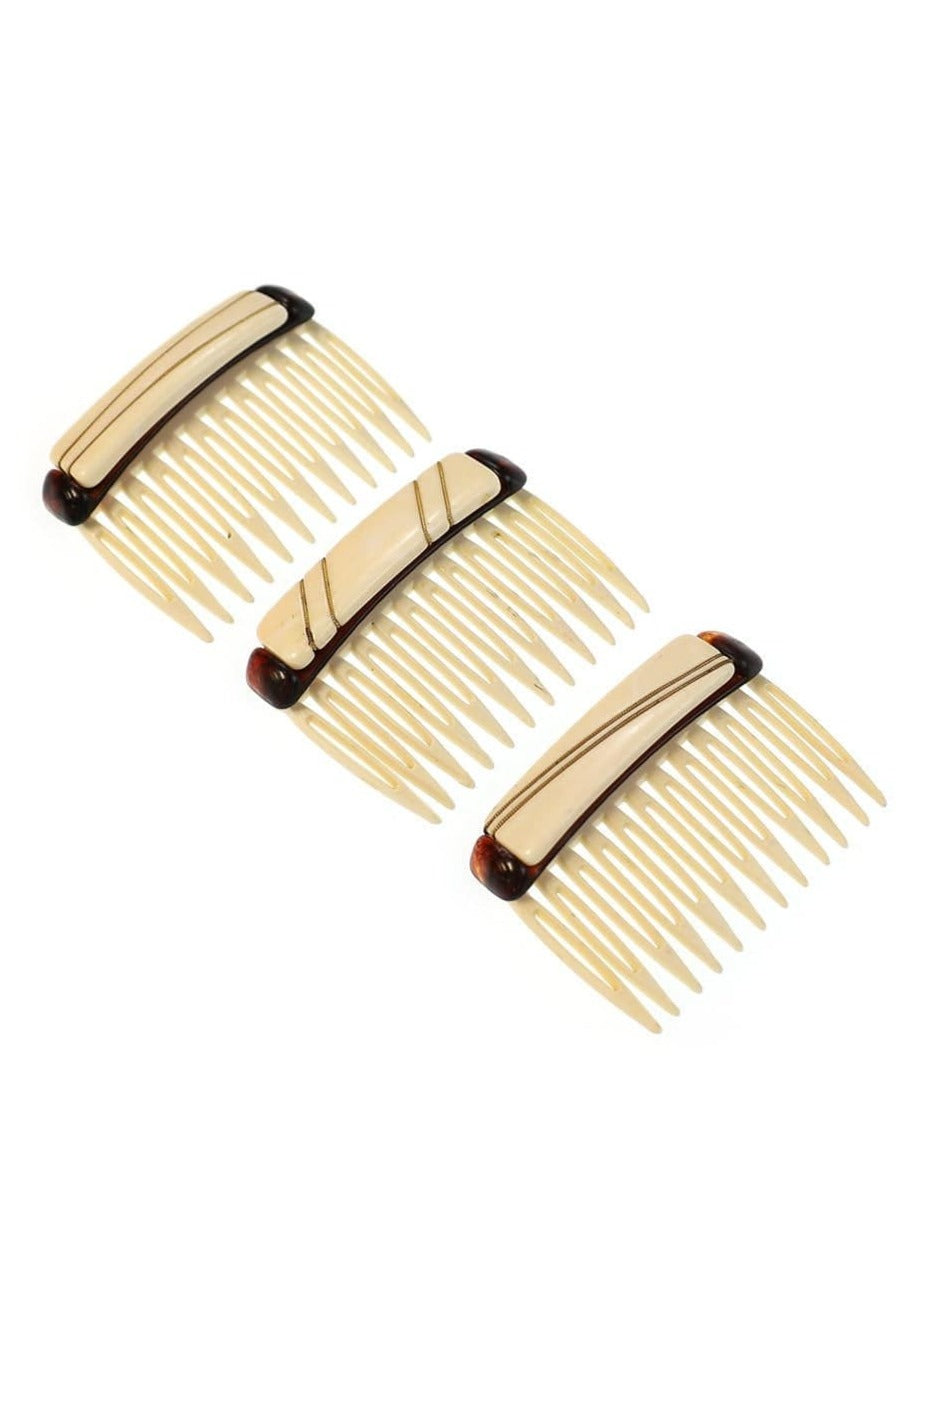 Vintage Italian Ivory Hair Comb with Gold Inlay